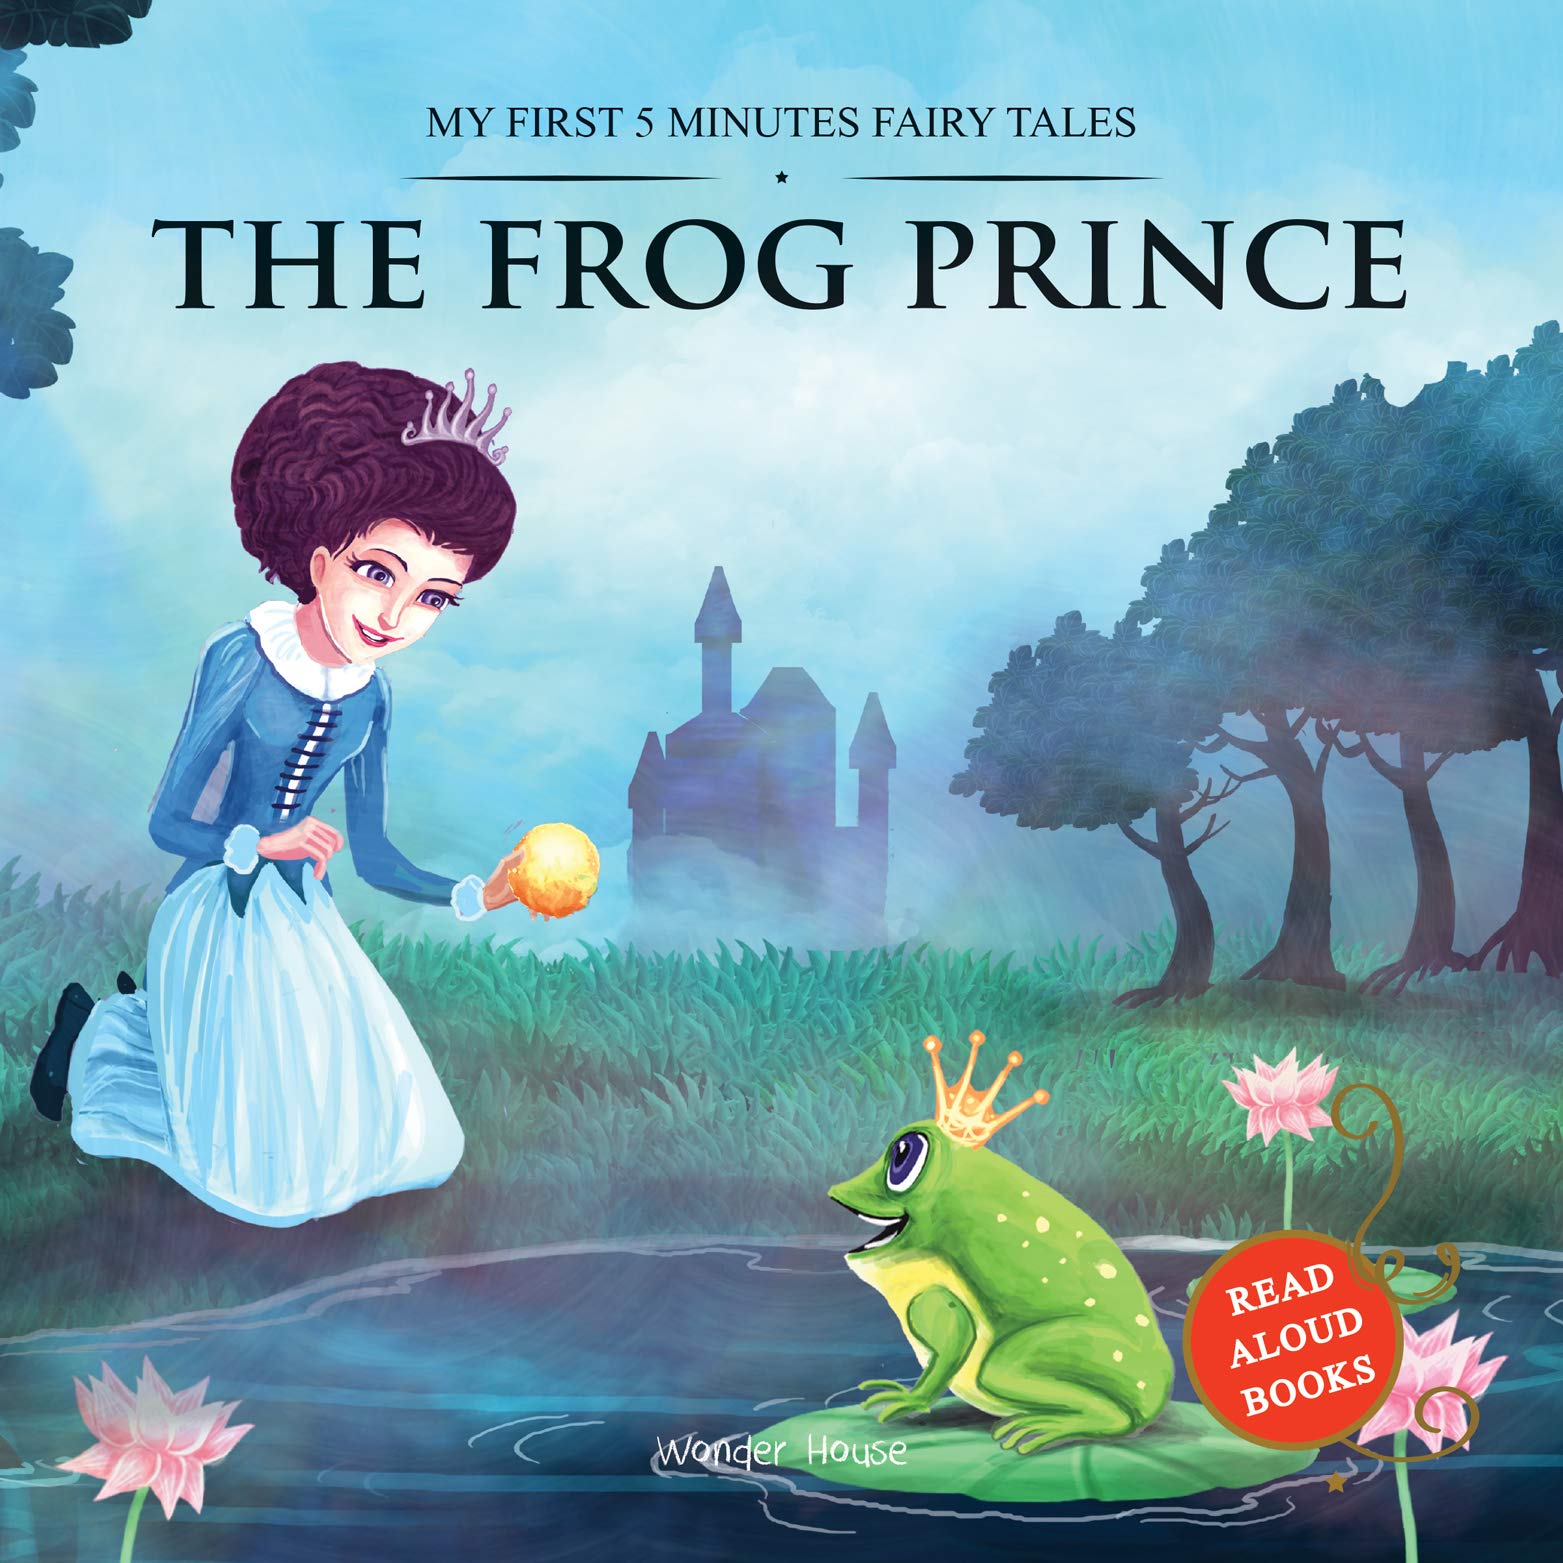 My First 5 Minutes Fairy Tales  The Frog Prince (Read Aloud Books)